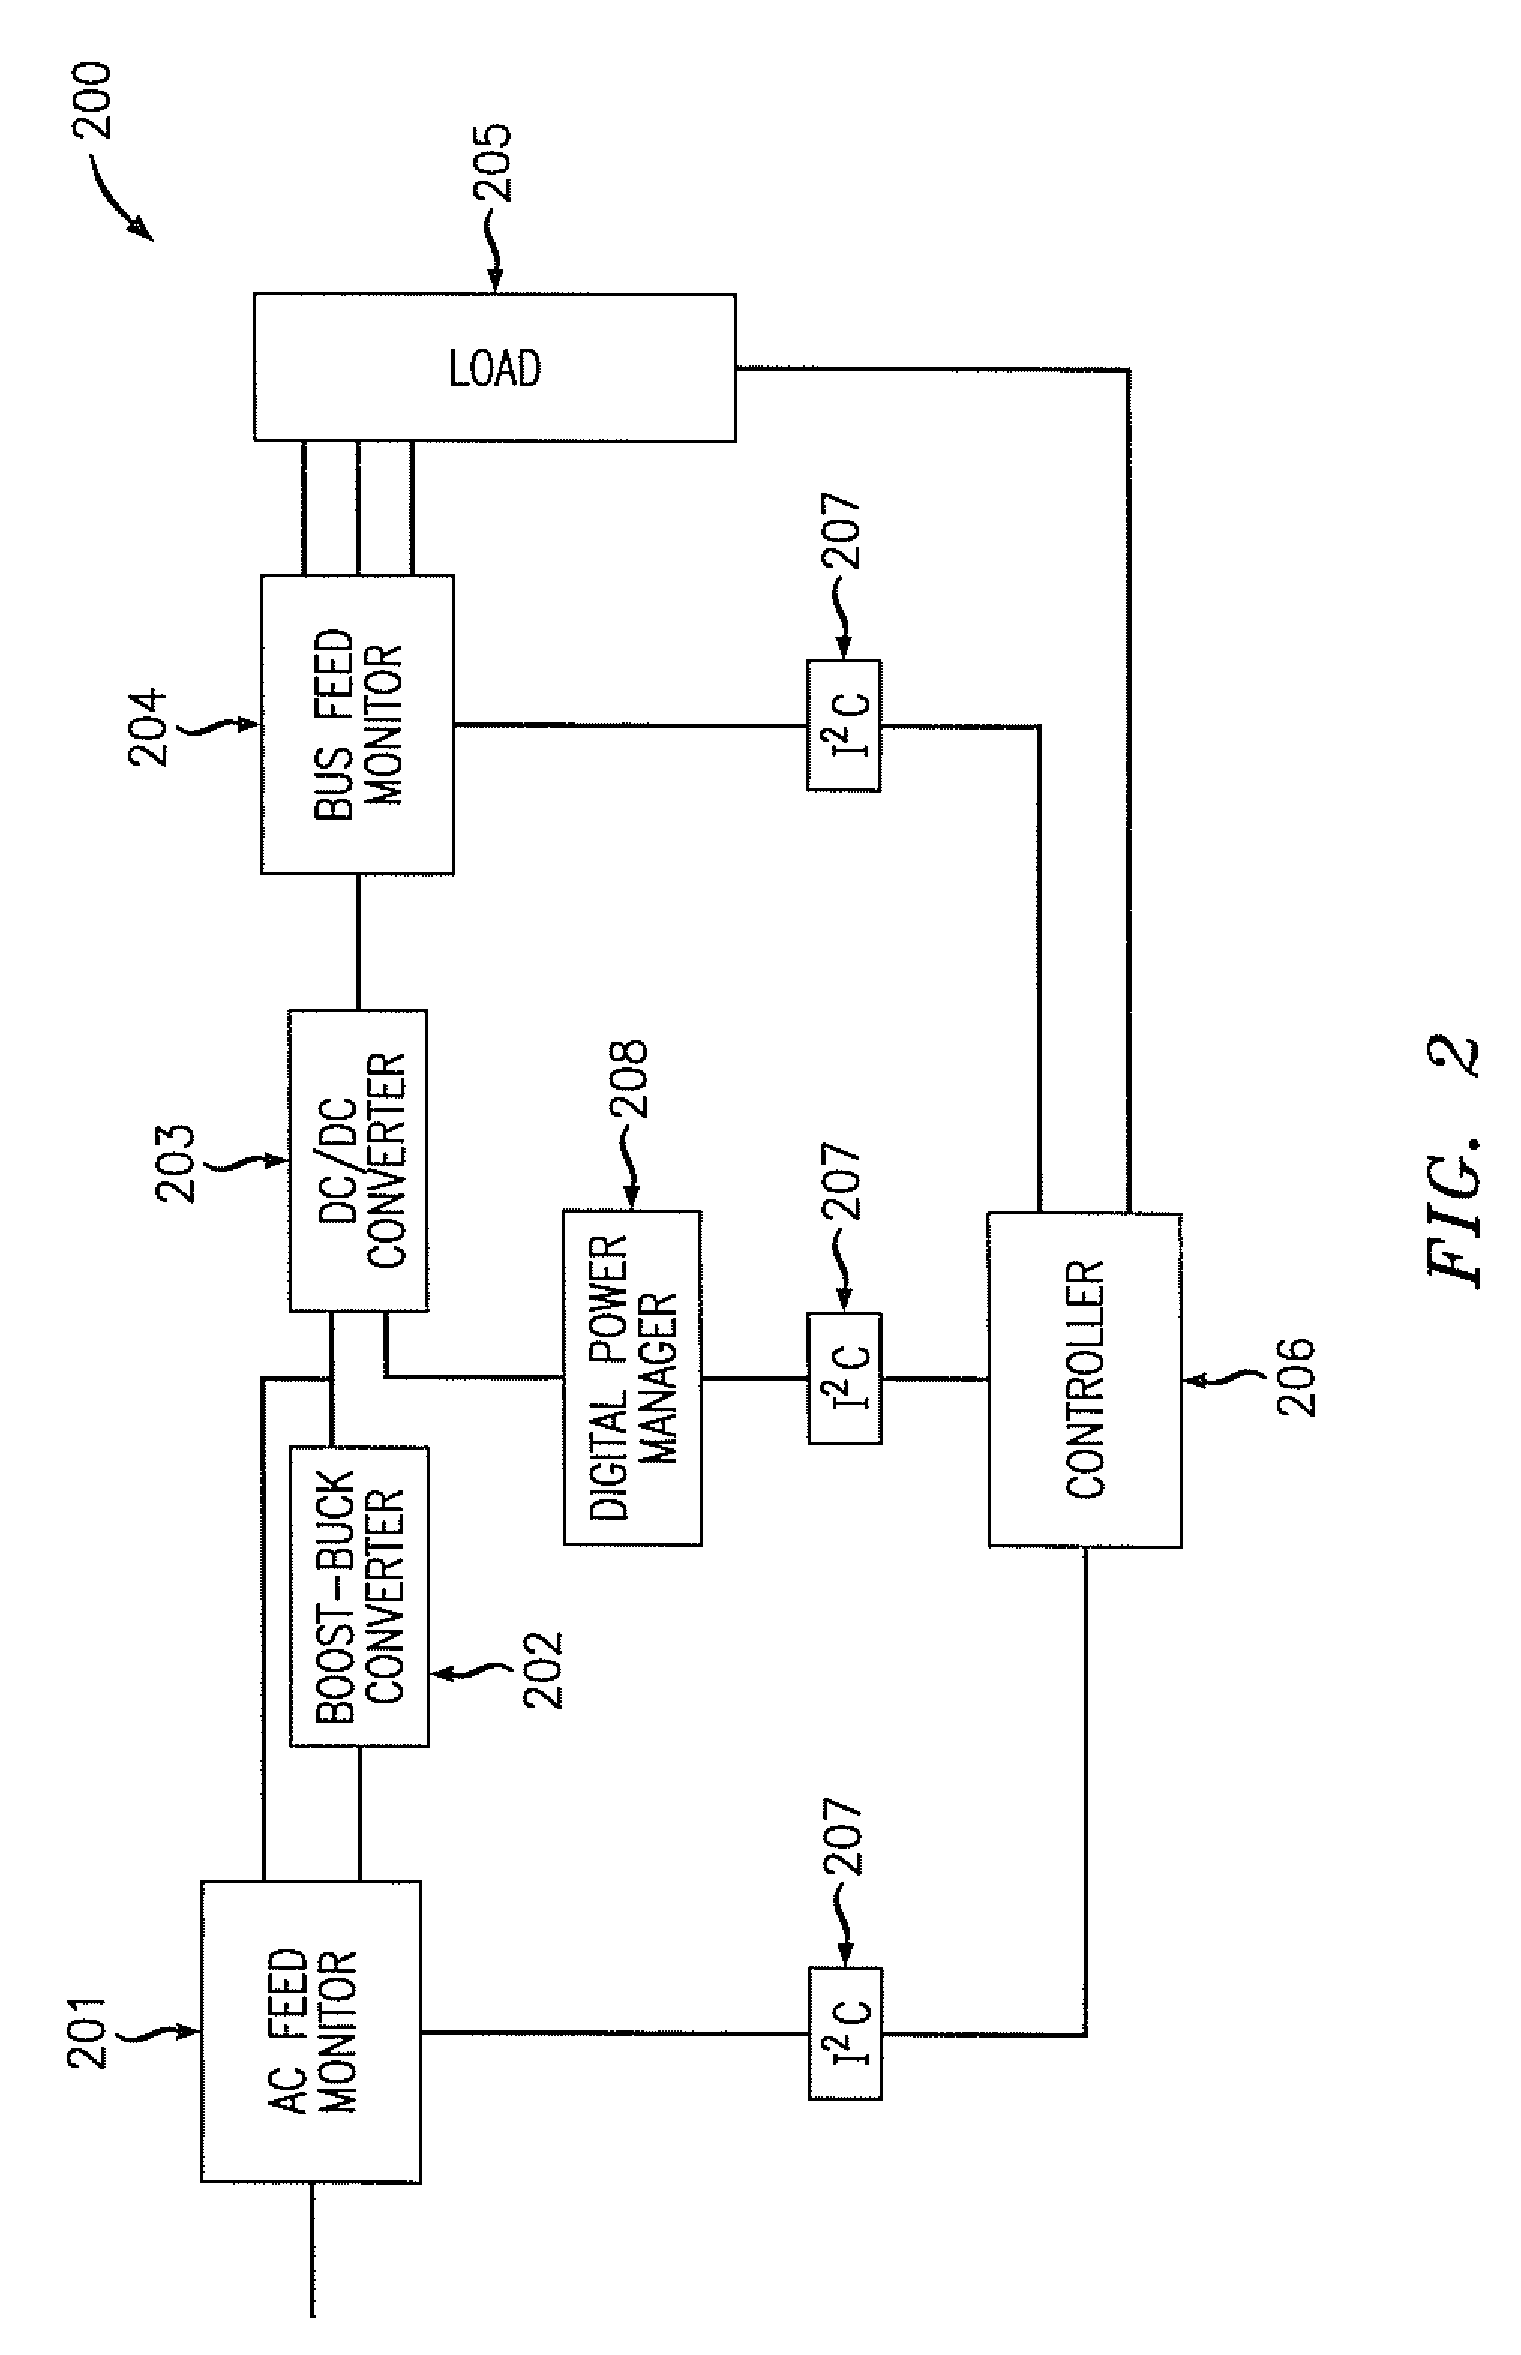 Closed-loop efficiency modulation for use in AC powered applications